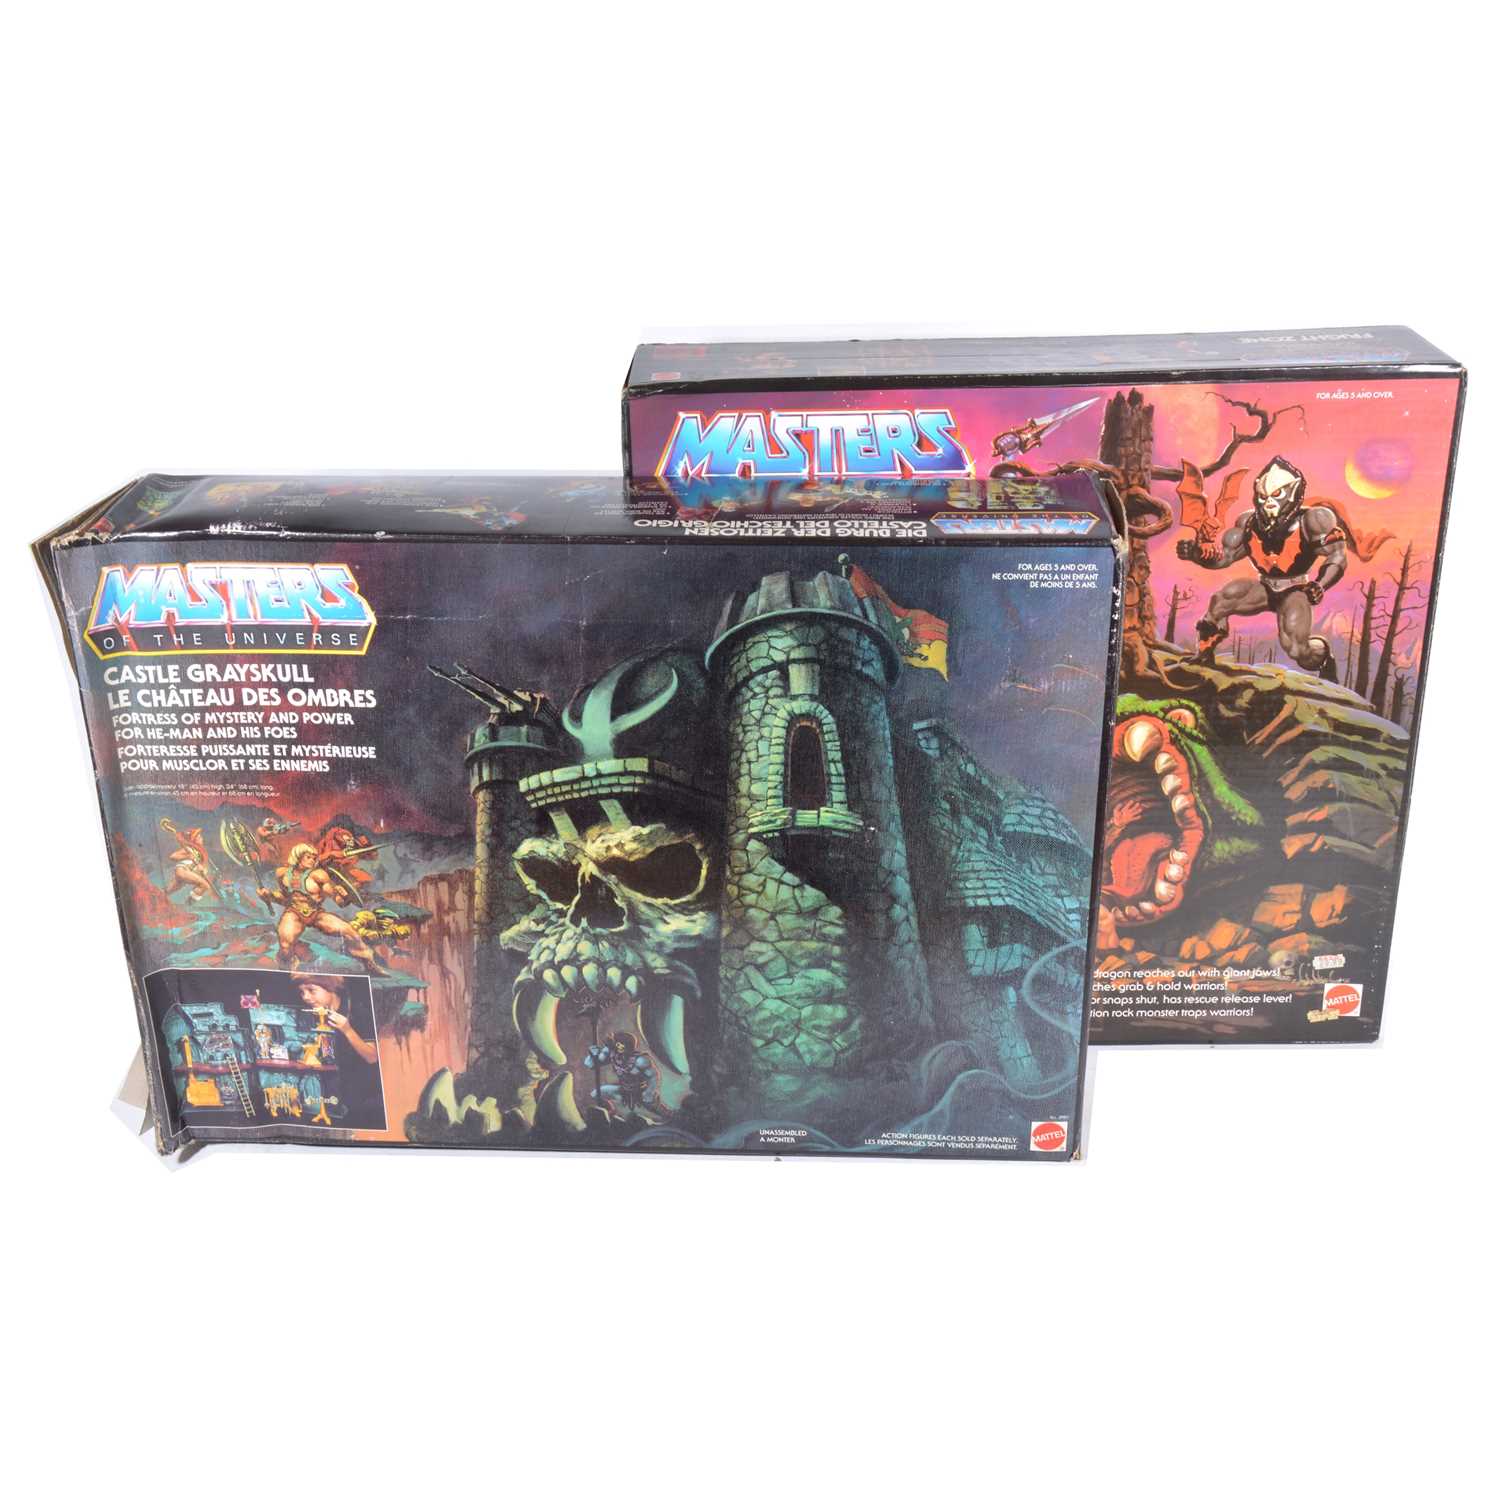 270 - He-Man Master of the Universe by Mattel; two sets including Fright Zone 'The Evil Horde' and Grayskull Castle, both boxed. 